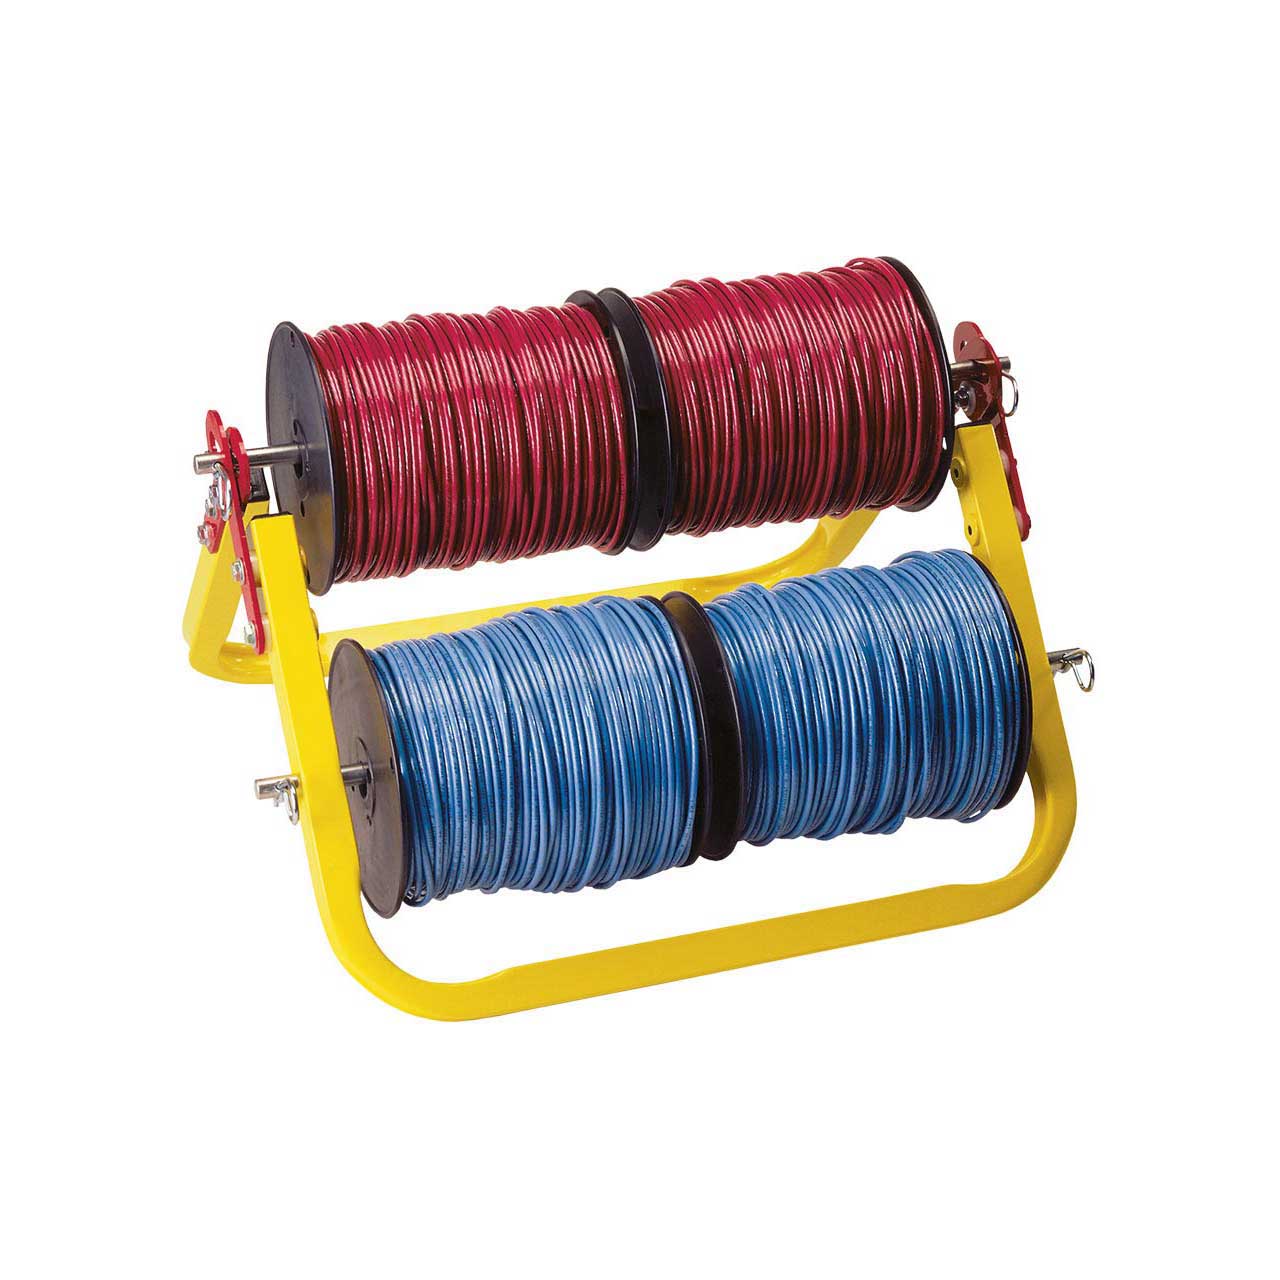 SpoolMaster EC-4 Installers Cable & Wire Spool Caddy